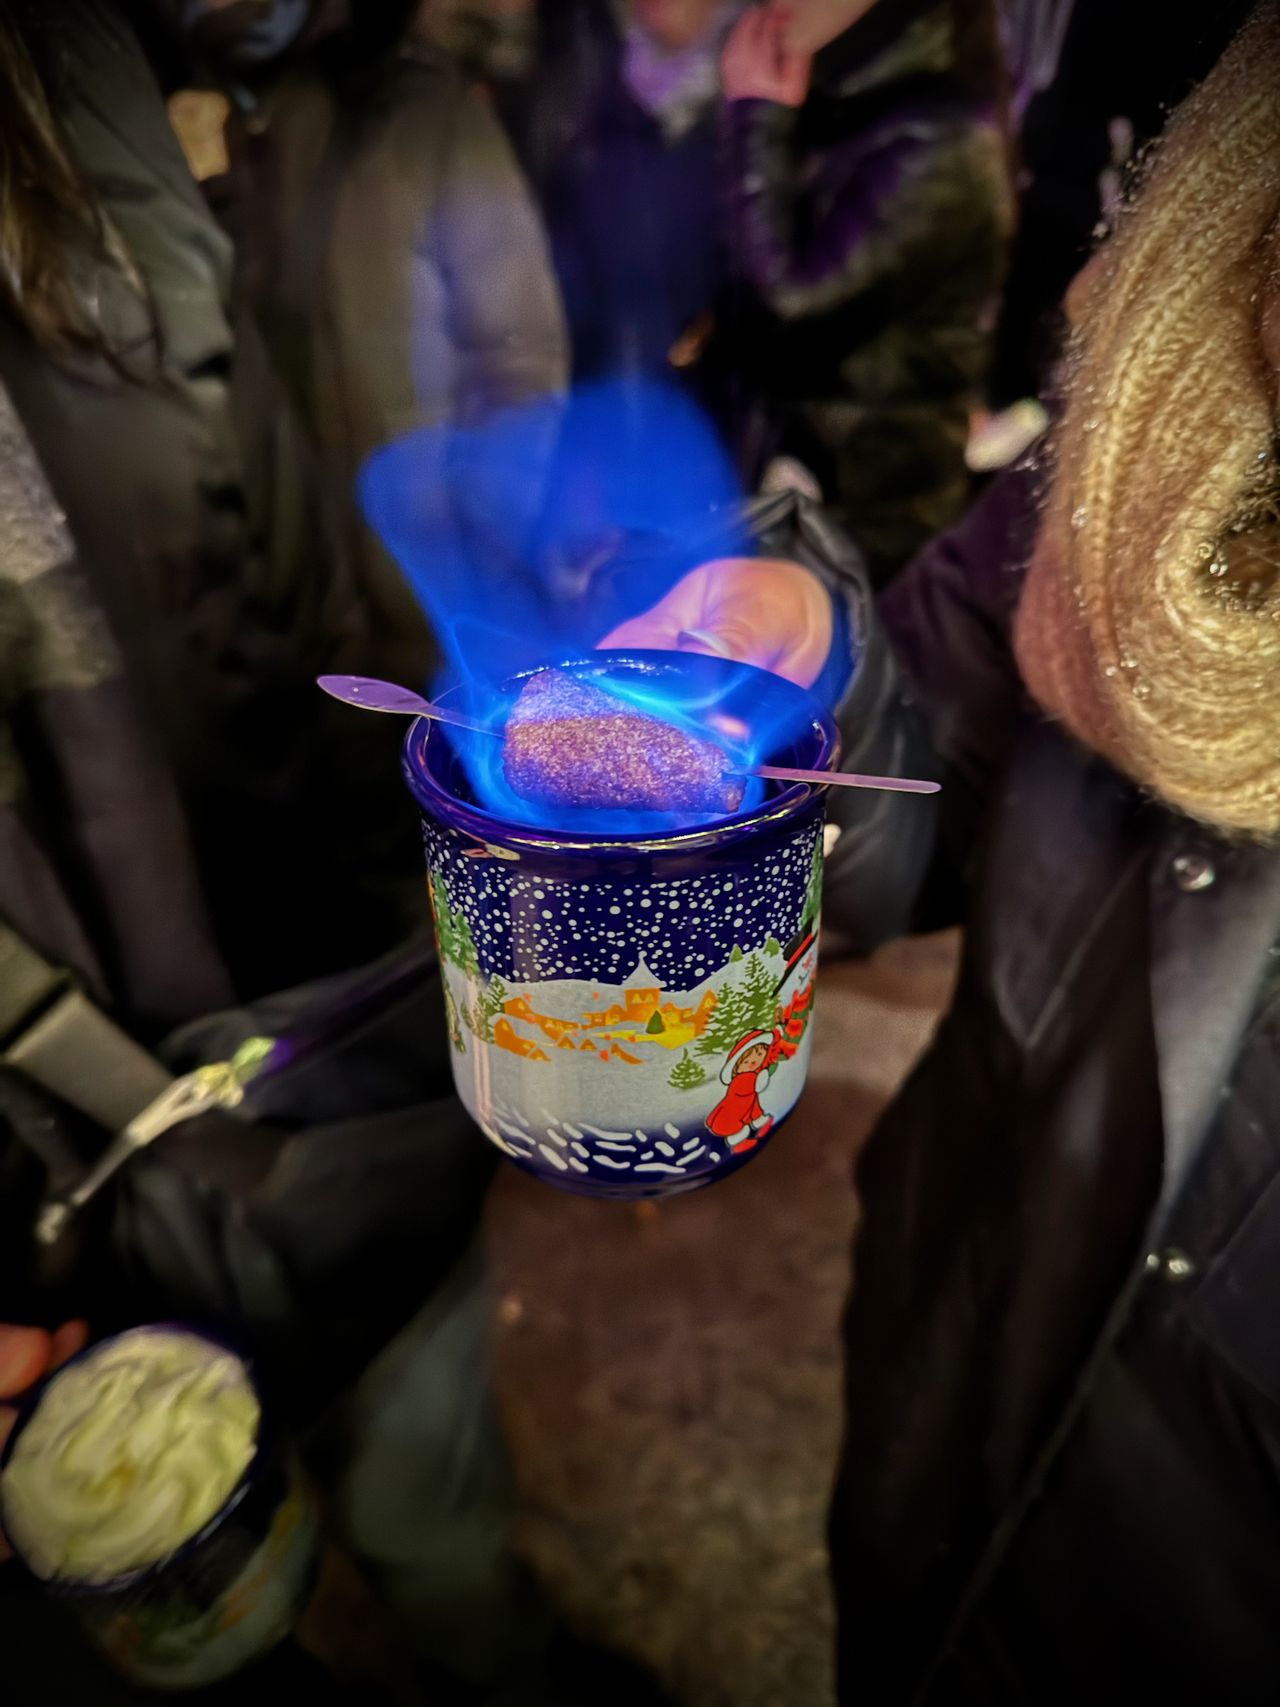 Close-up of the Feuerzangenbowl, a hot drink with a sugar stick on top which has been set on fire. There is a deep blue flame coming off of the sugar.